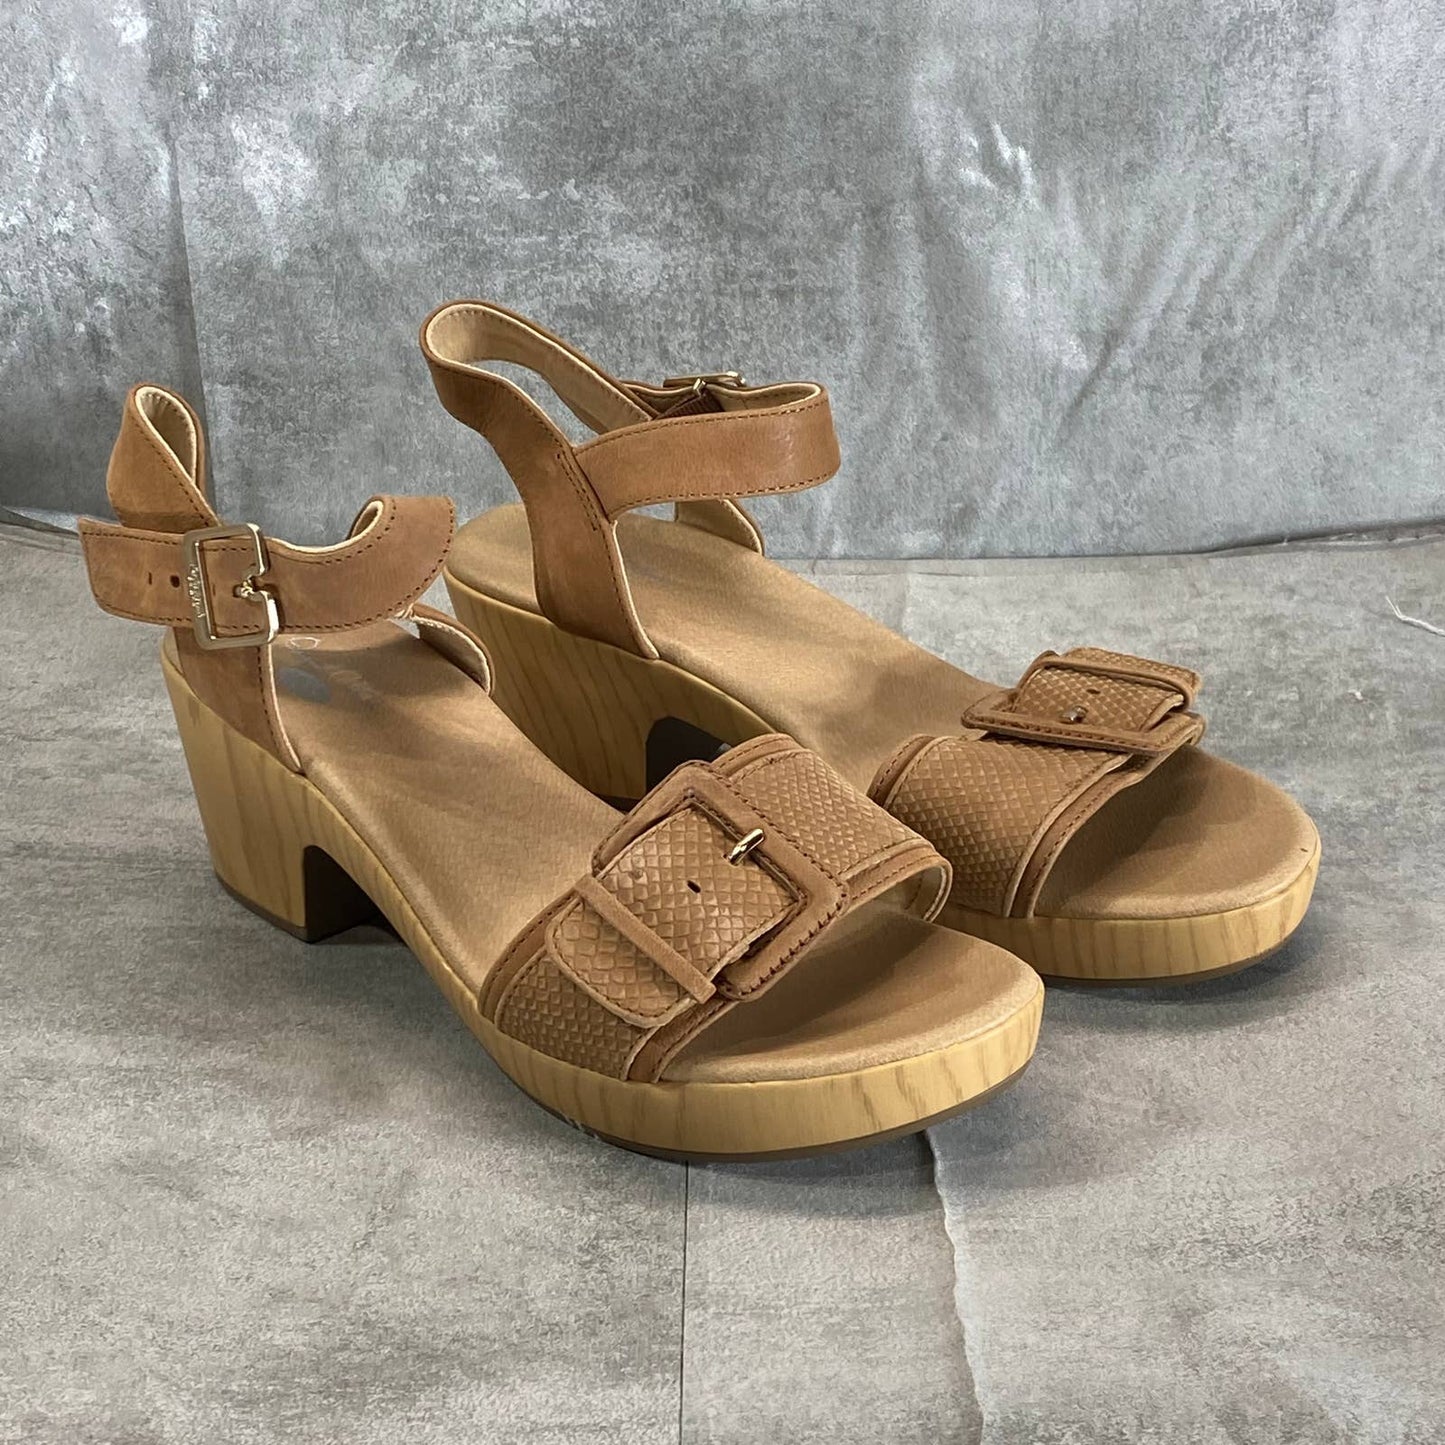 DR. SCHOLL'S Women's Honey Brown Leather Felicity Too Ankle-Strap Sandals SZ 9